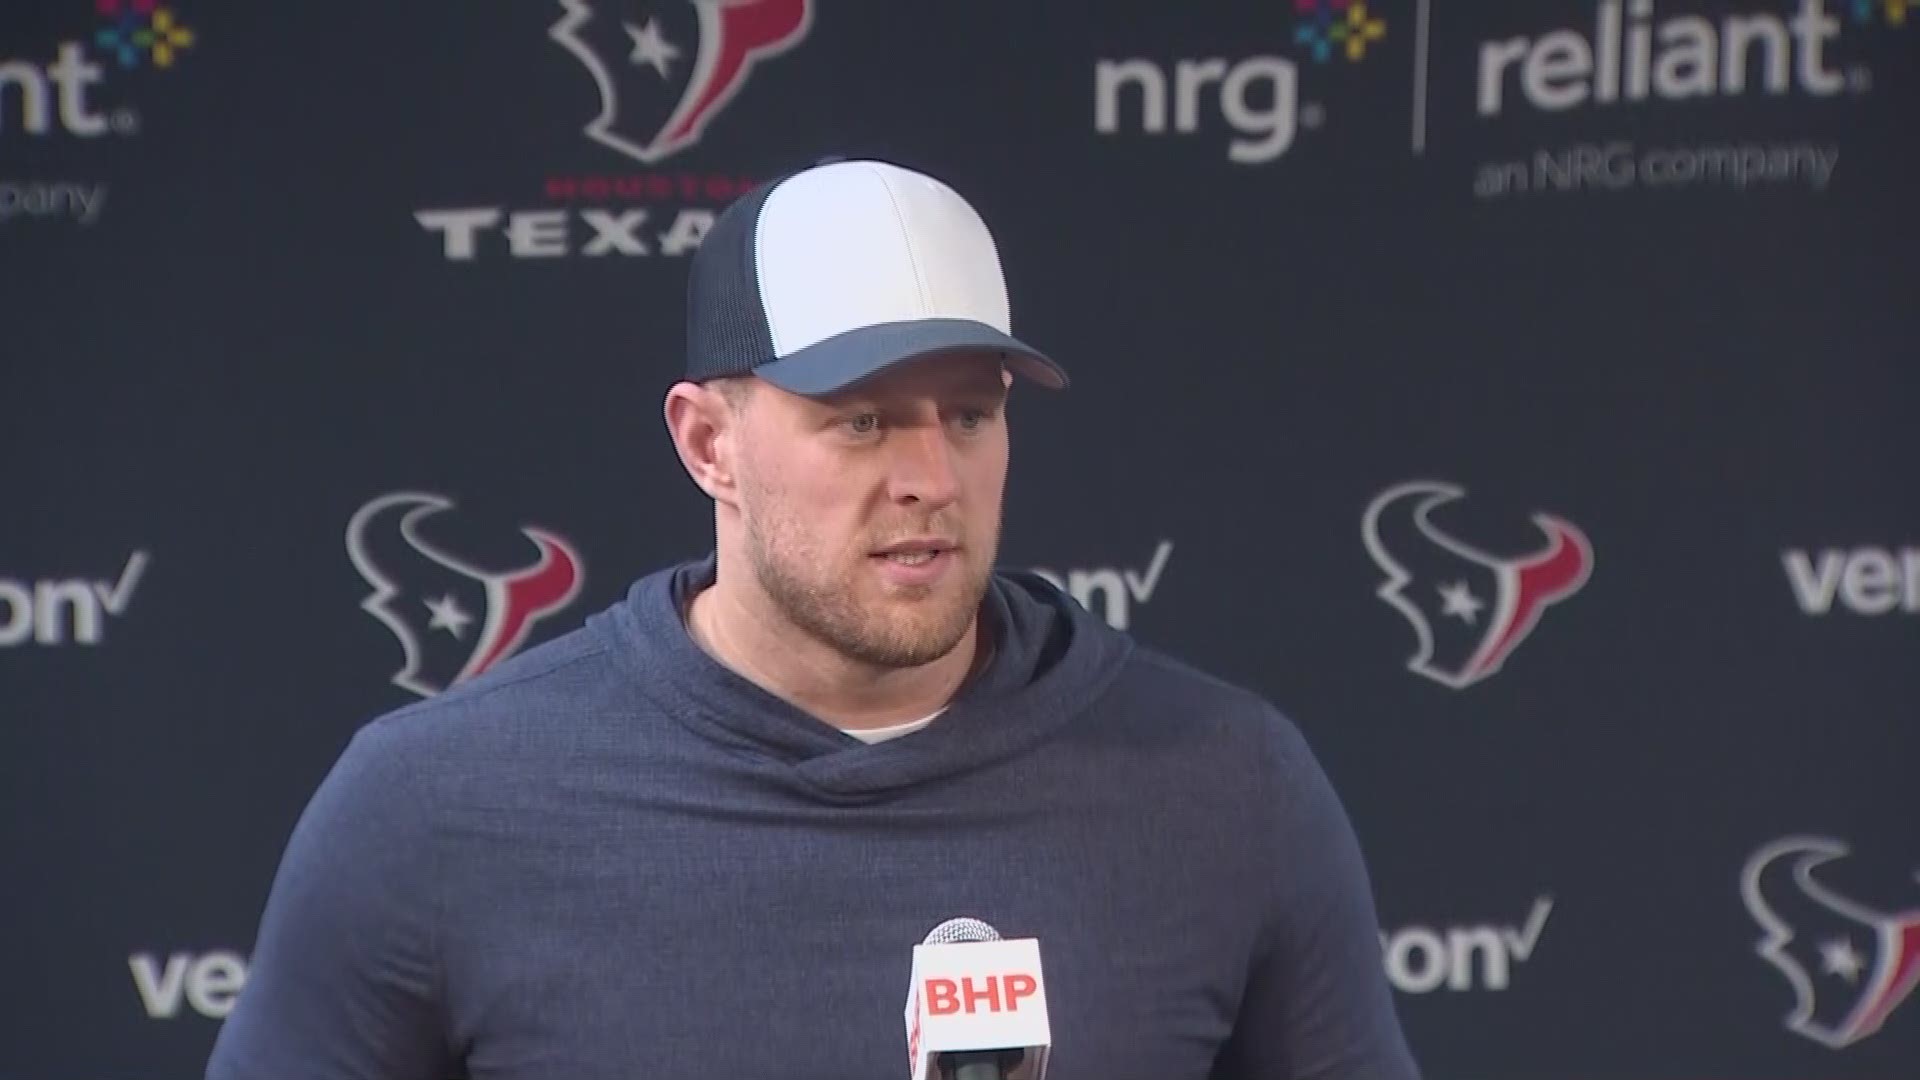 Watt spoke to the media on Tuesday, saying he knows that there's risk, but he's looking forward to being back on the field in the playoffs.